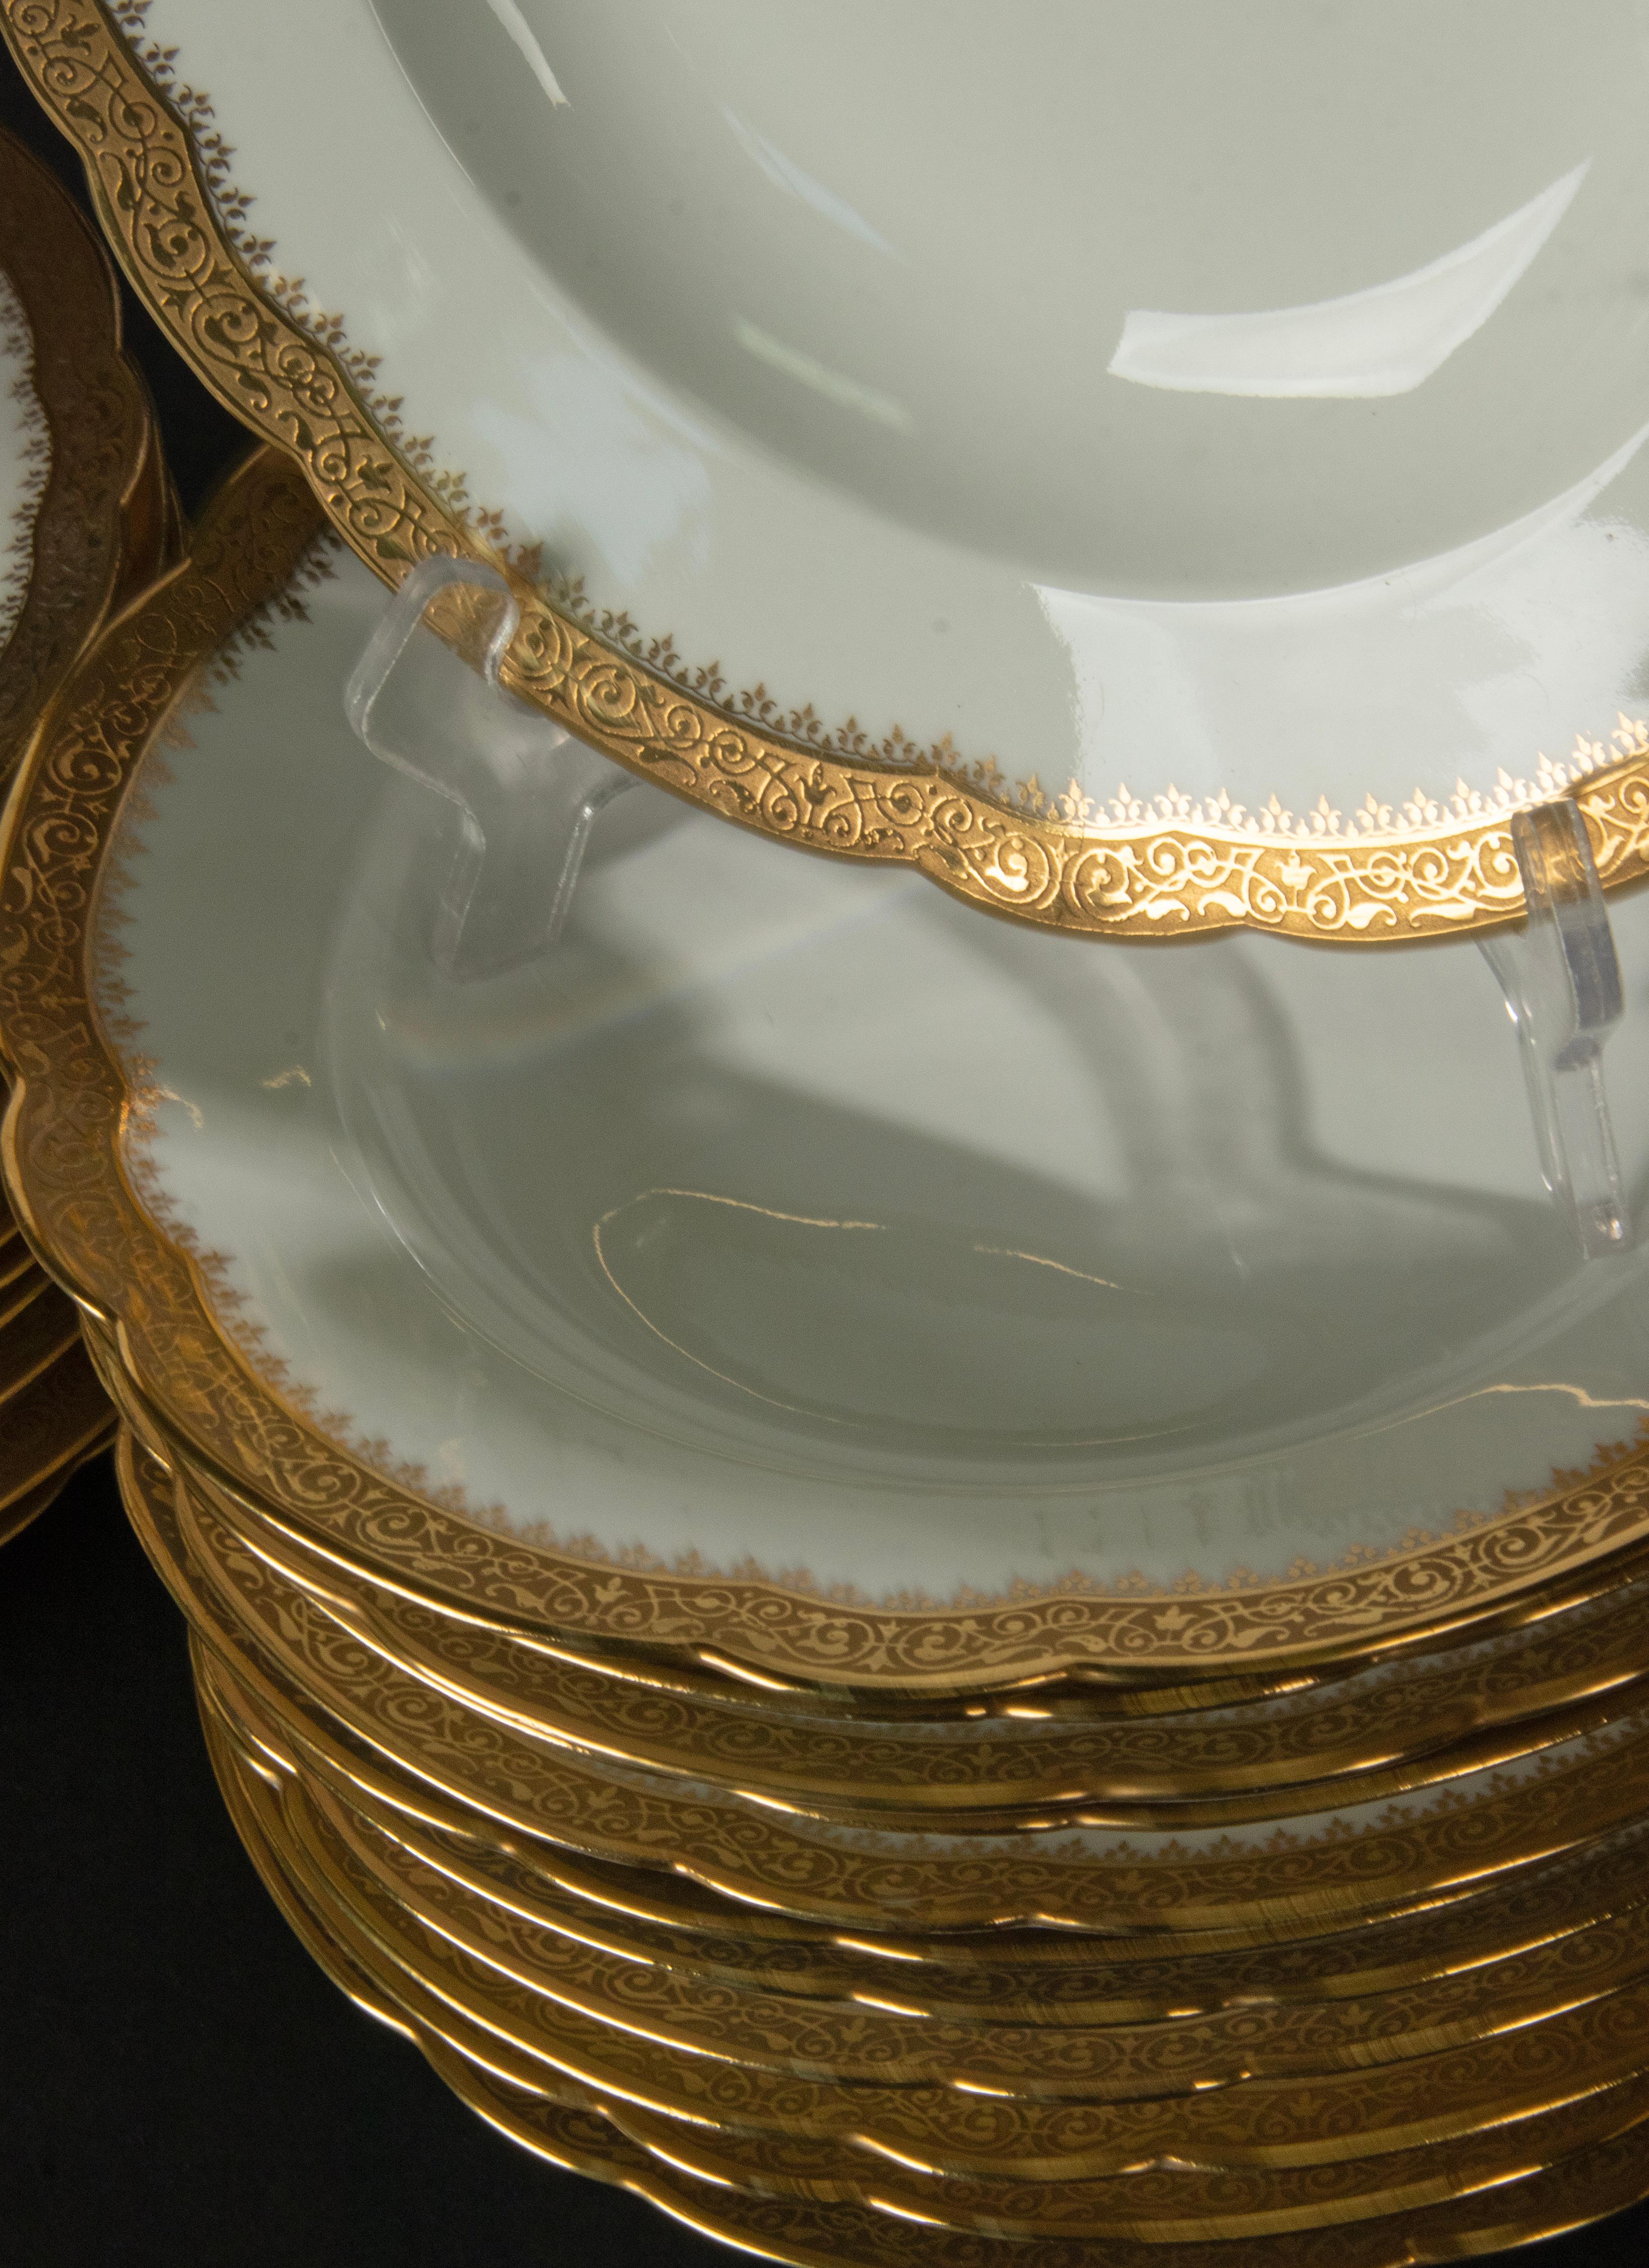 Mid-20th Century 51-Piece Set Porcelain Tableware for 12 Persons - Limoges Incrusted Gold Trims